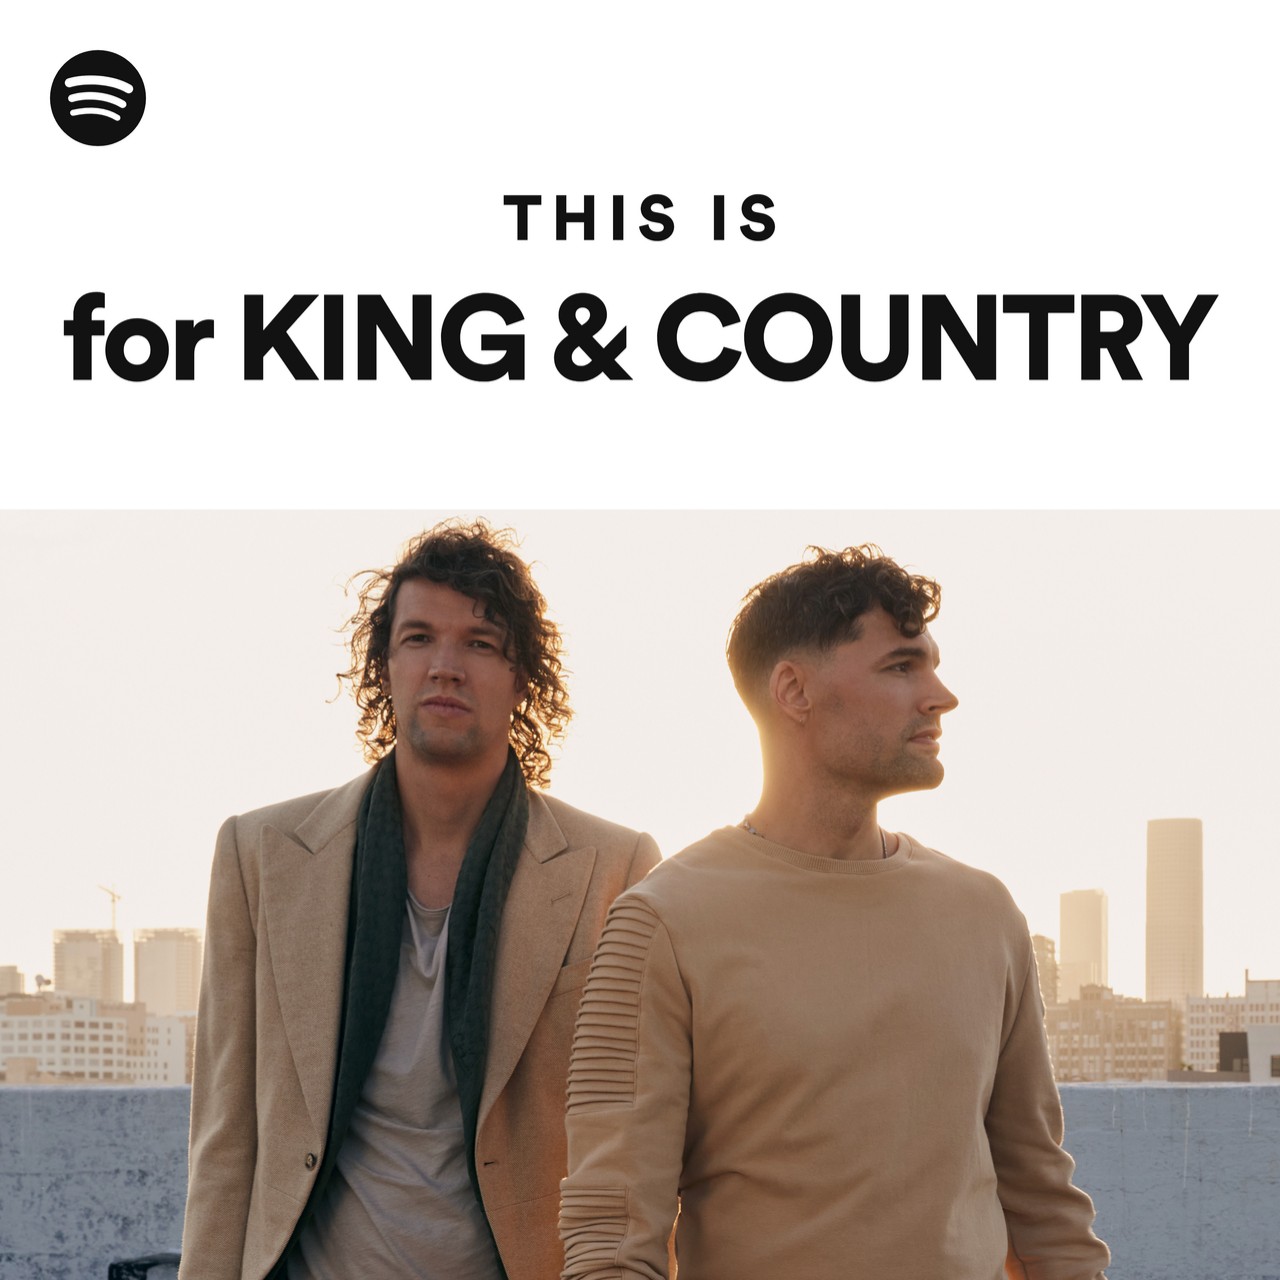 This Is for KING & COUNTRY